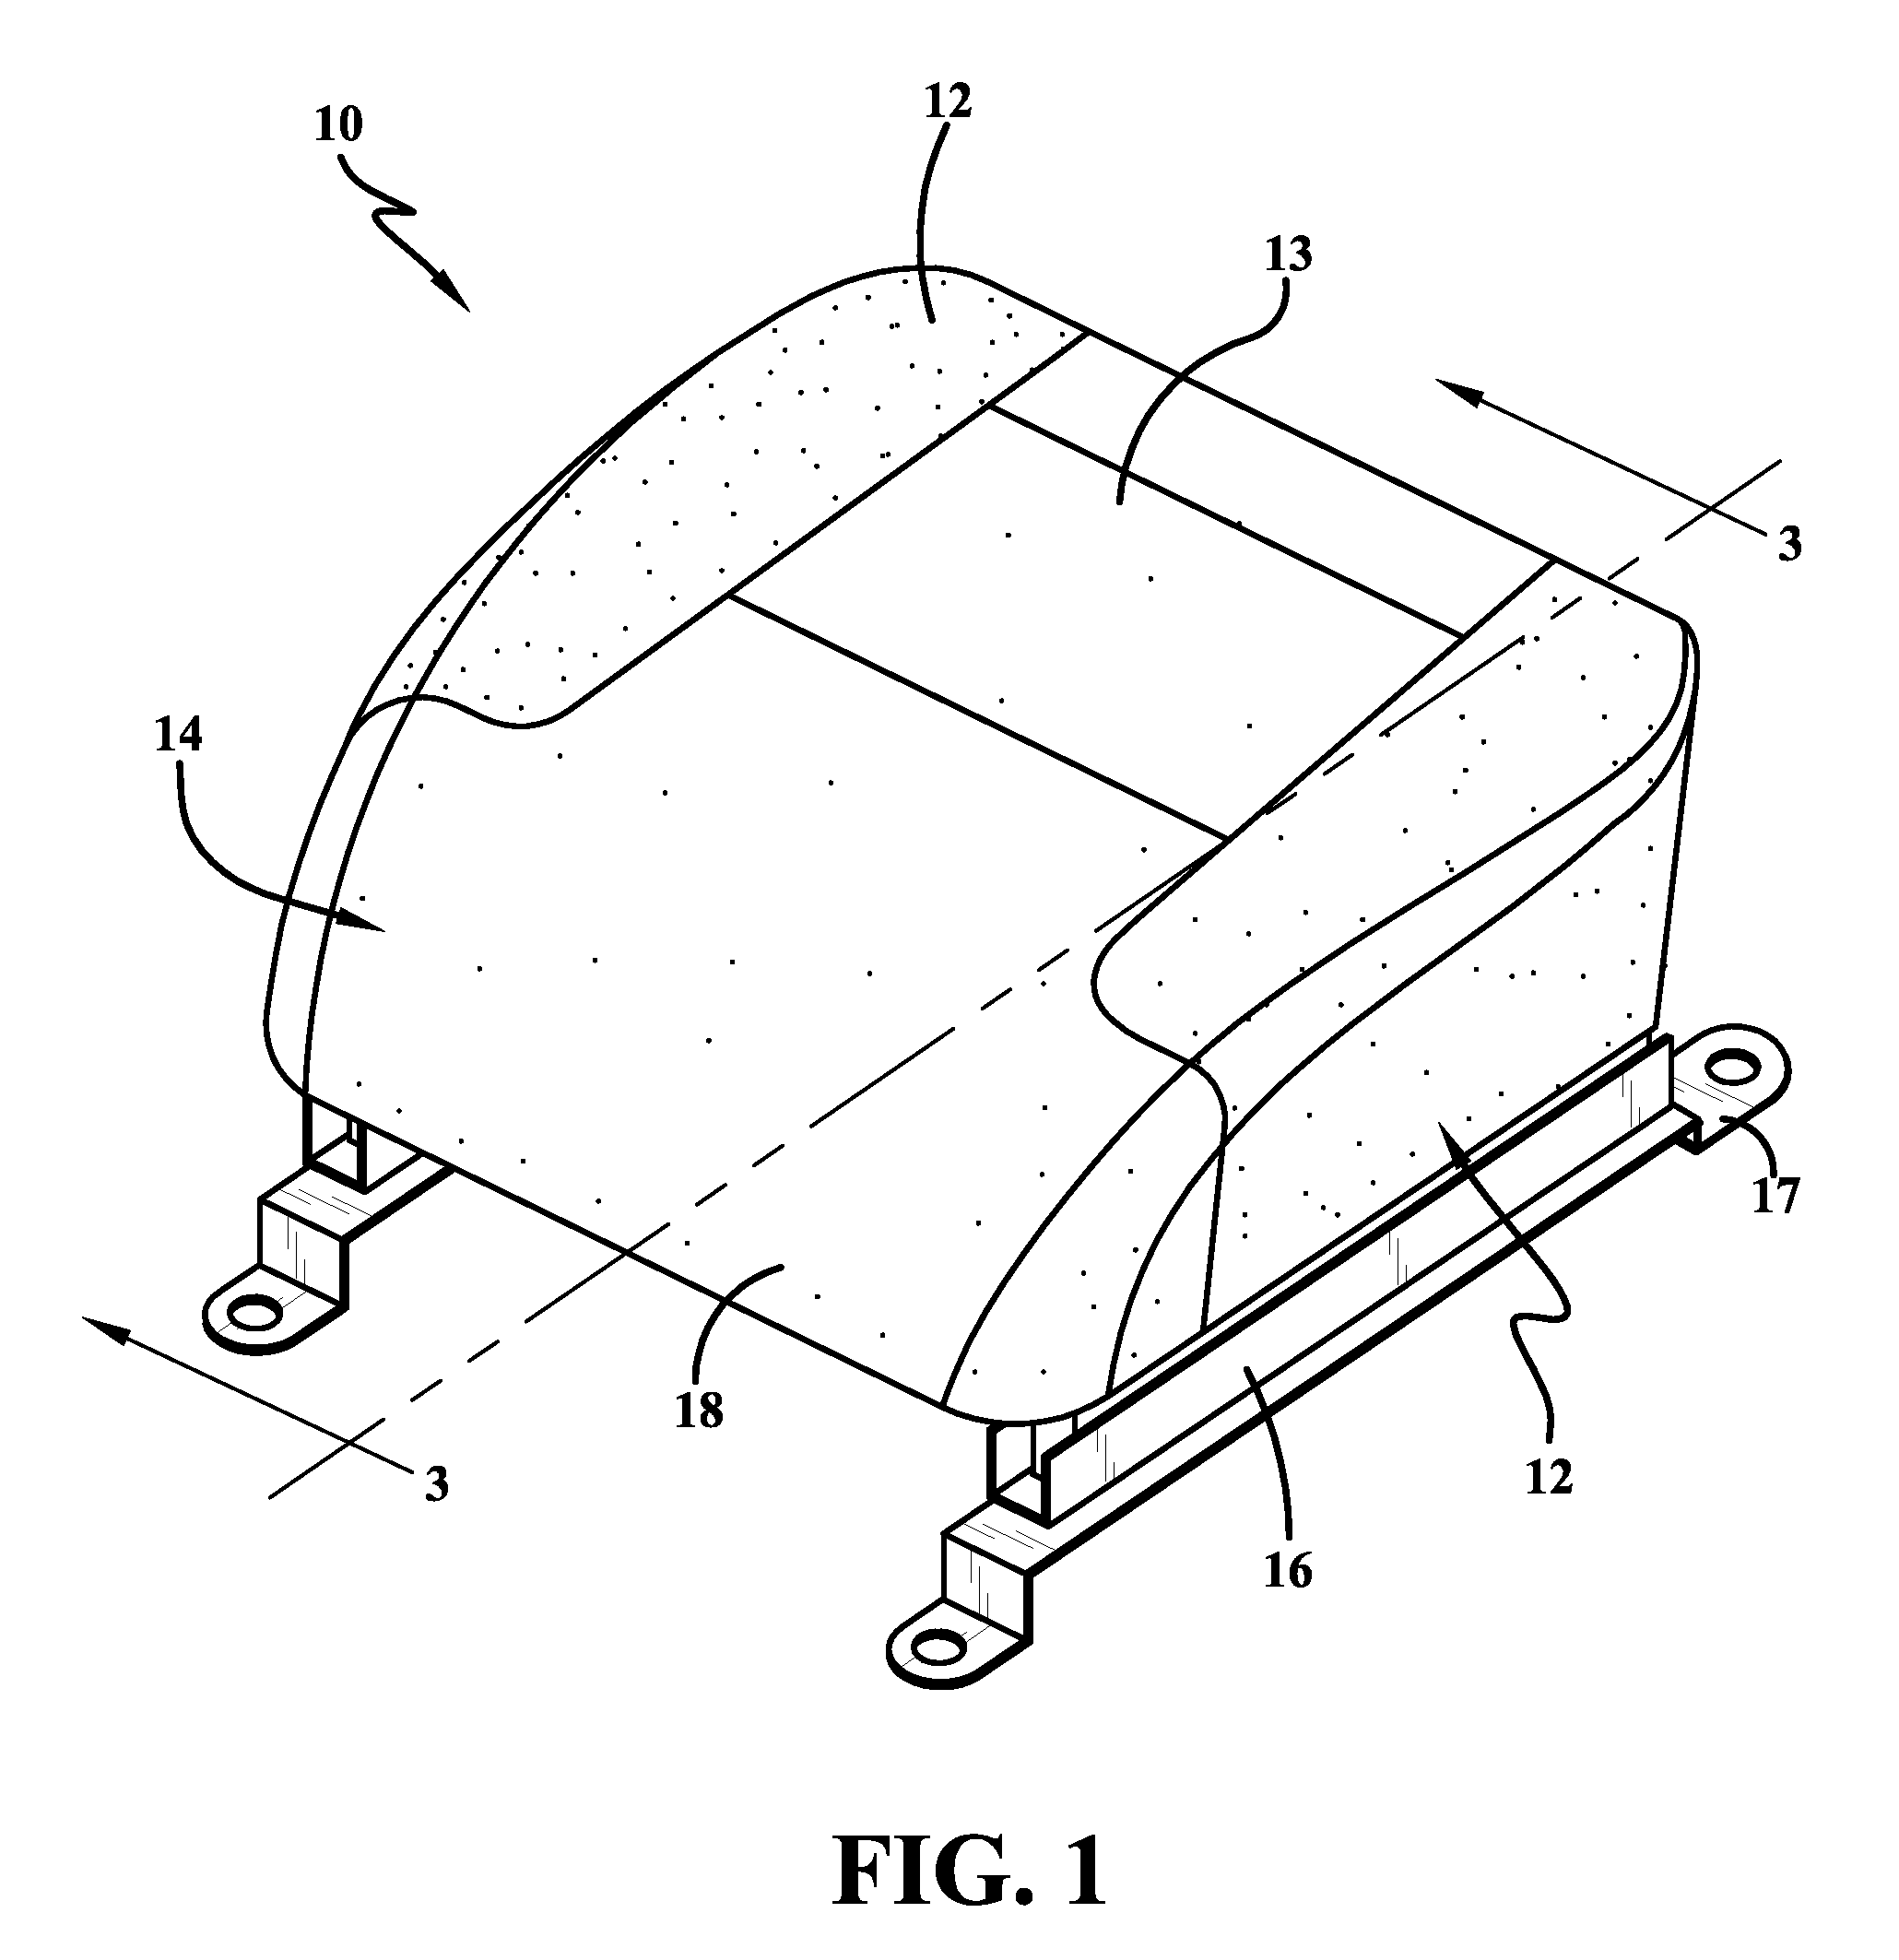 Adjustable Thigh Support for Automobile Seat Via Adjustment Plate